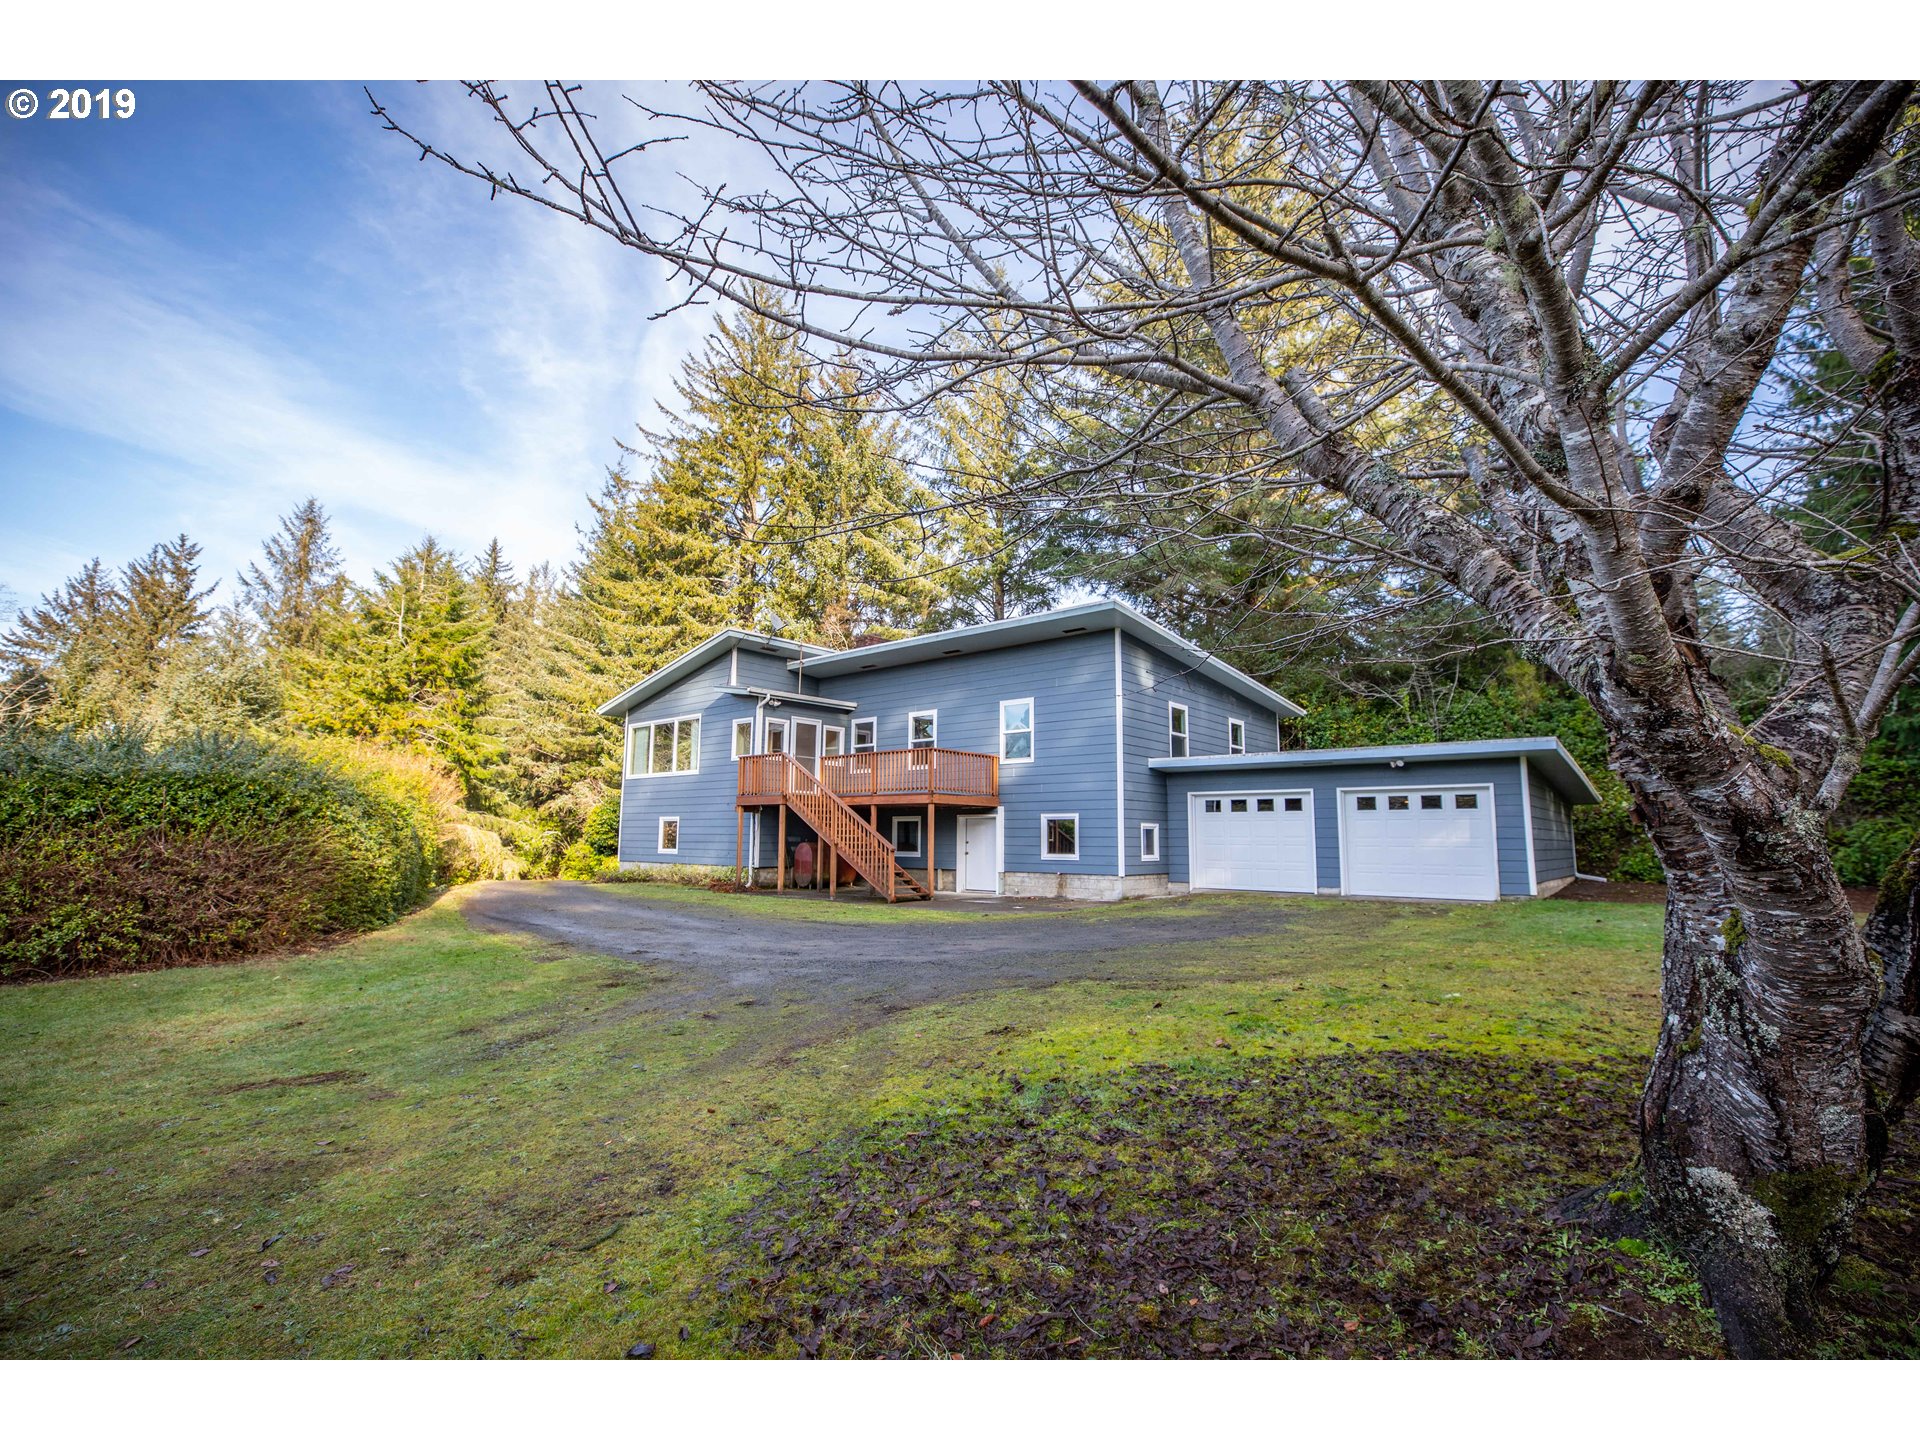 63462 COOS HEAD RD (1 of 32)